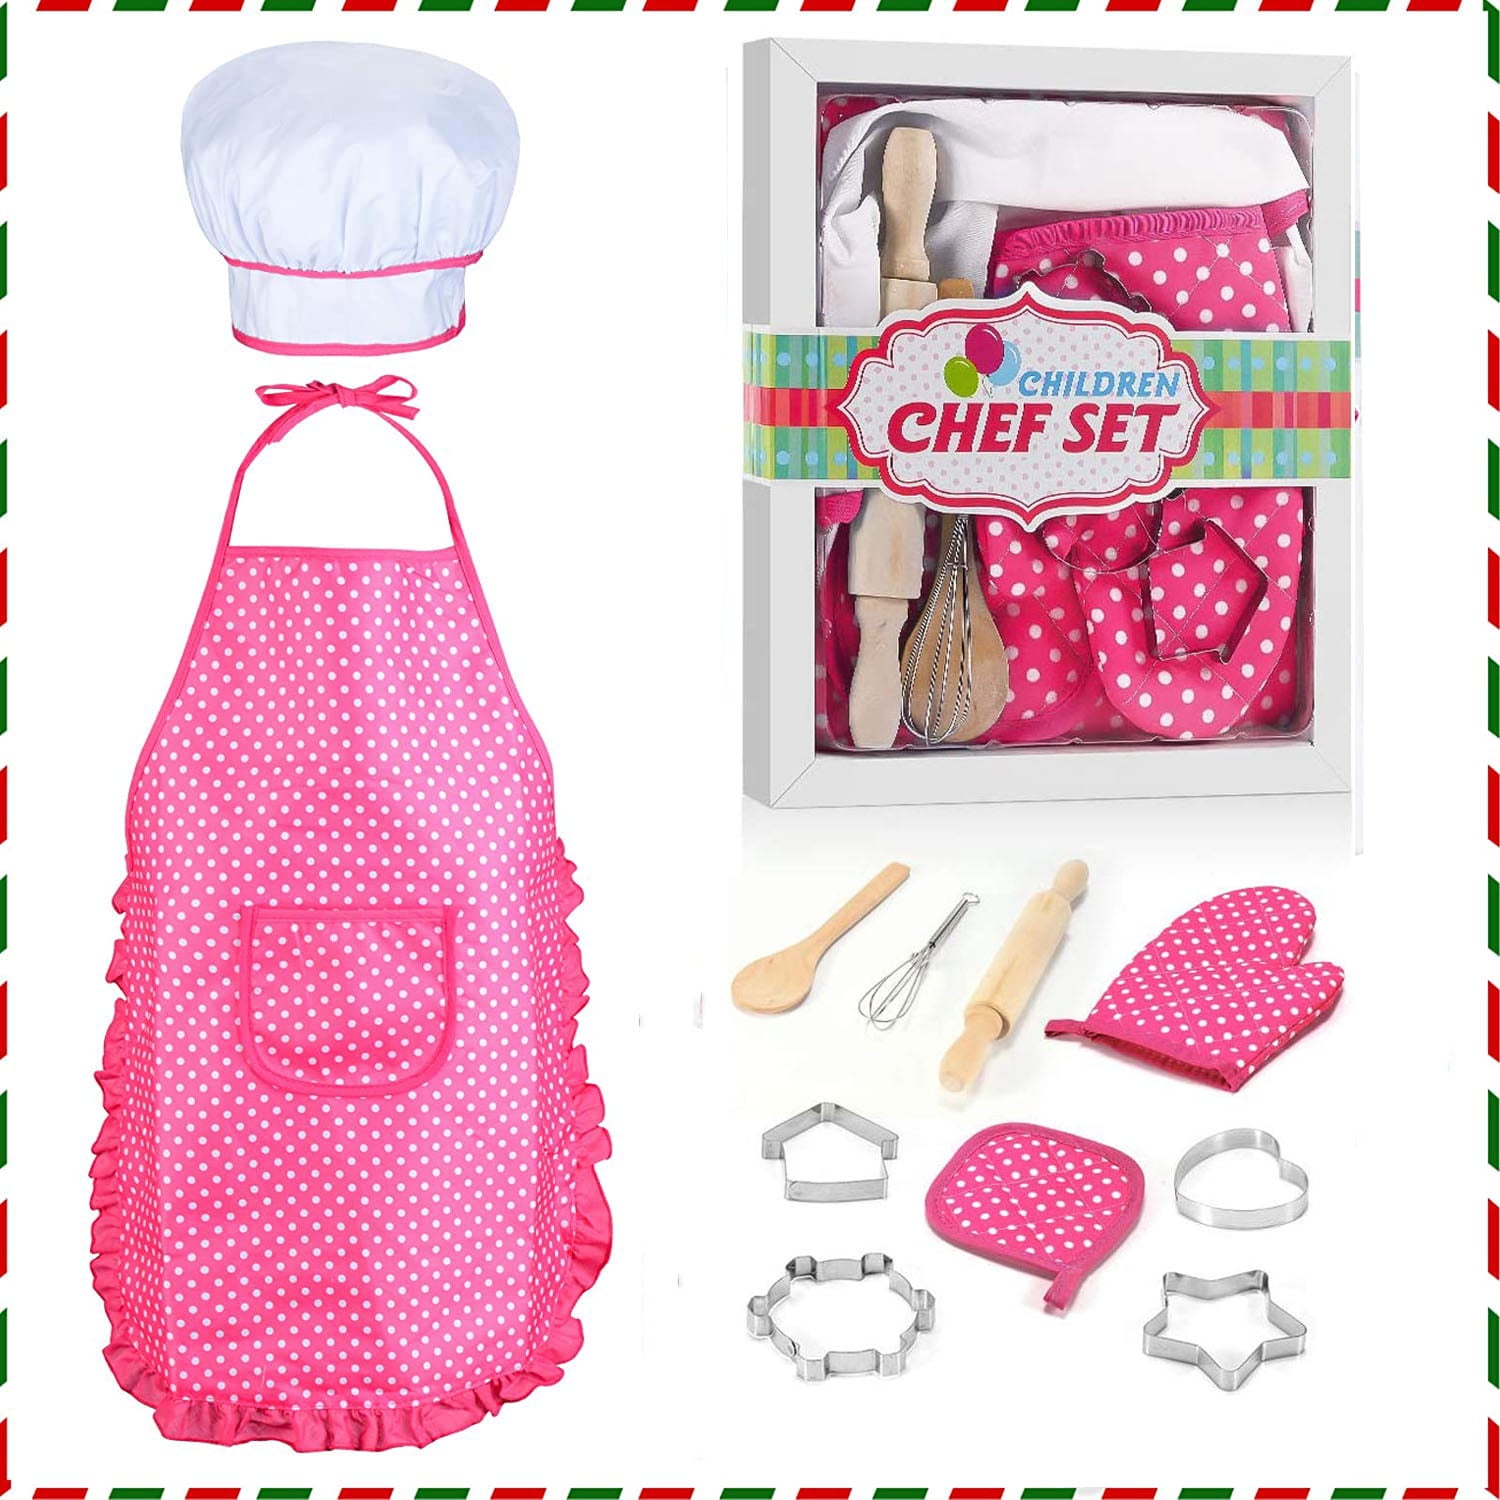 Dress up Chef Role Play Toys for Toddlers Girls 3 Years Jellydog Toy Kids Cooking Set for Girls,26 Pcs Kids Apron Costume Cooking Baking Set 